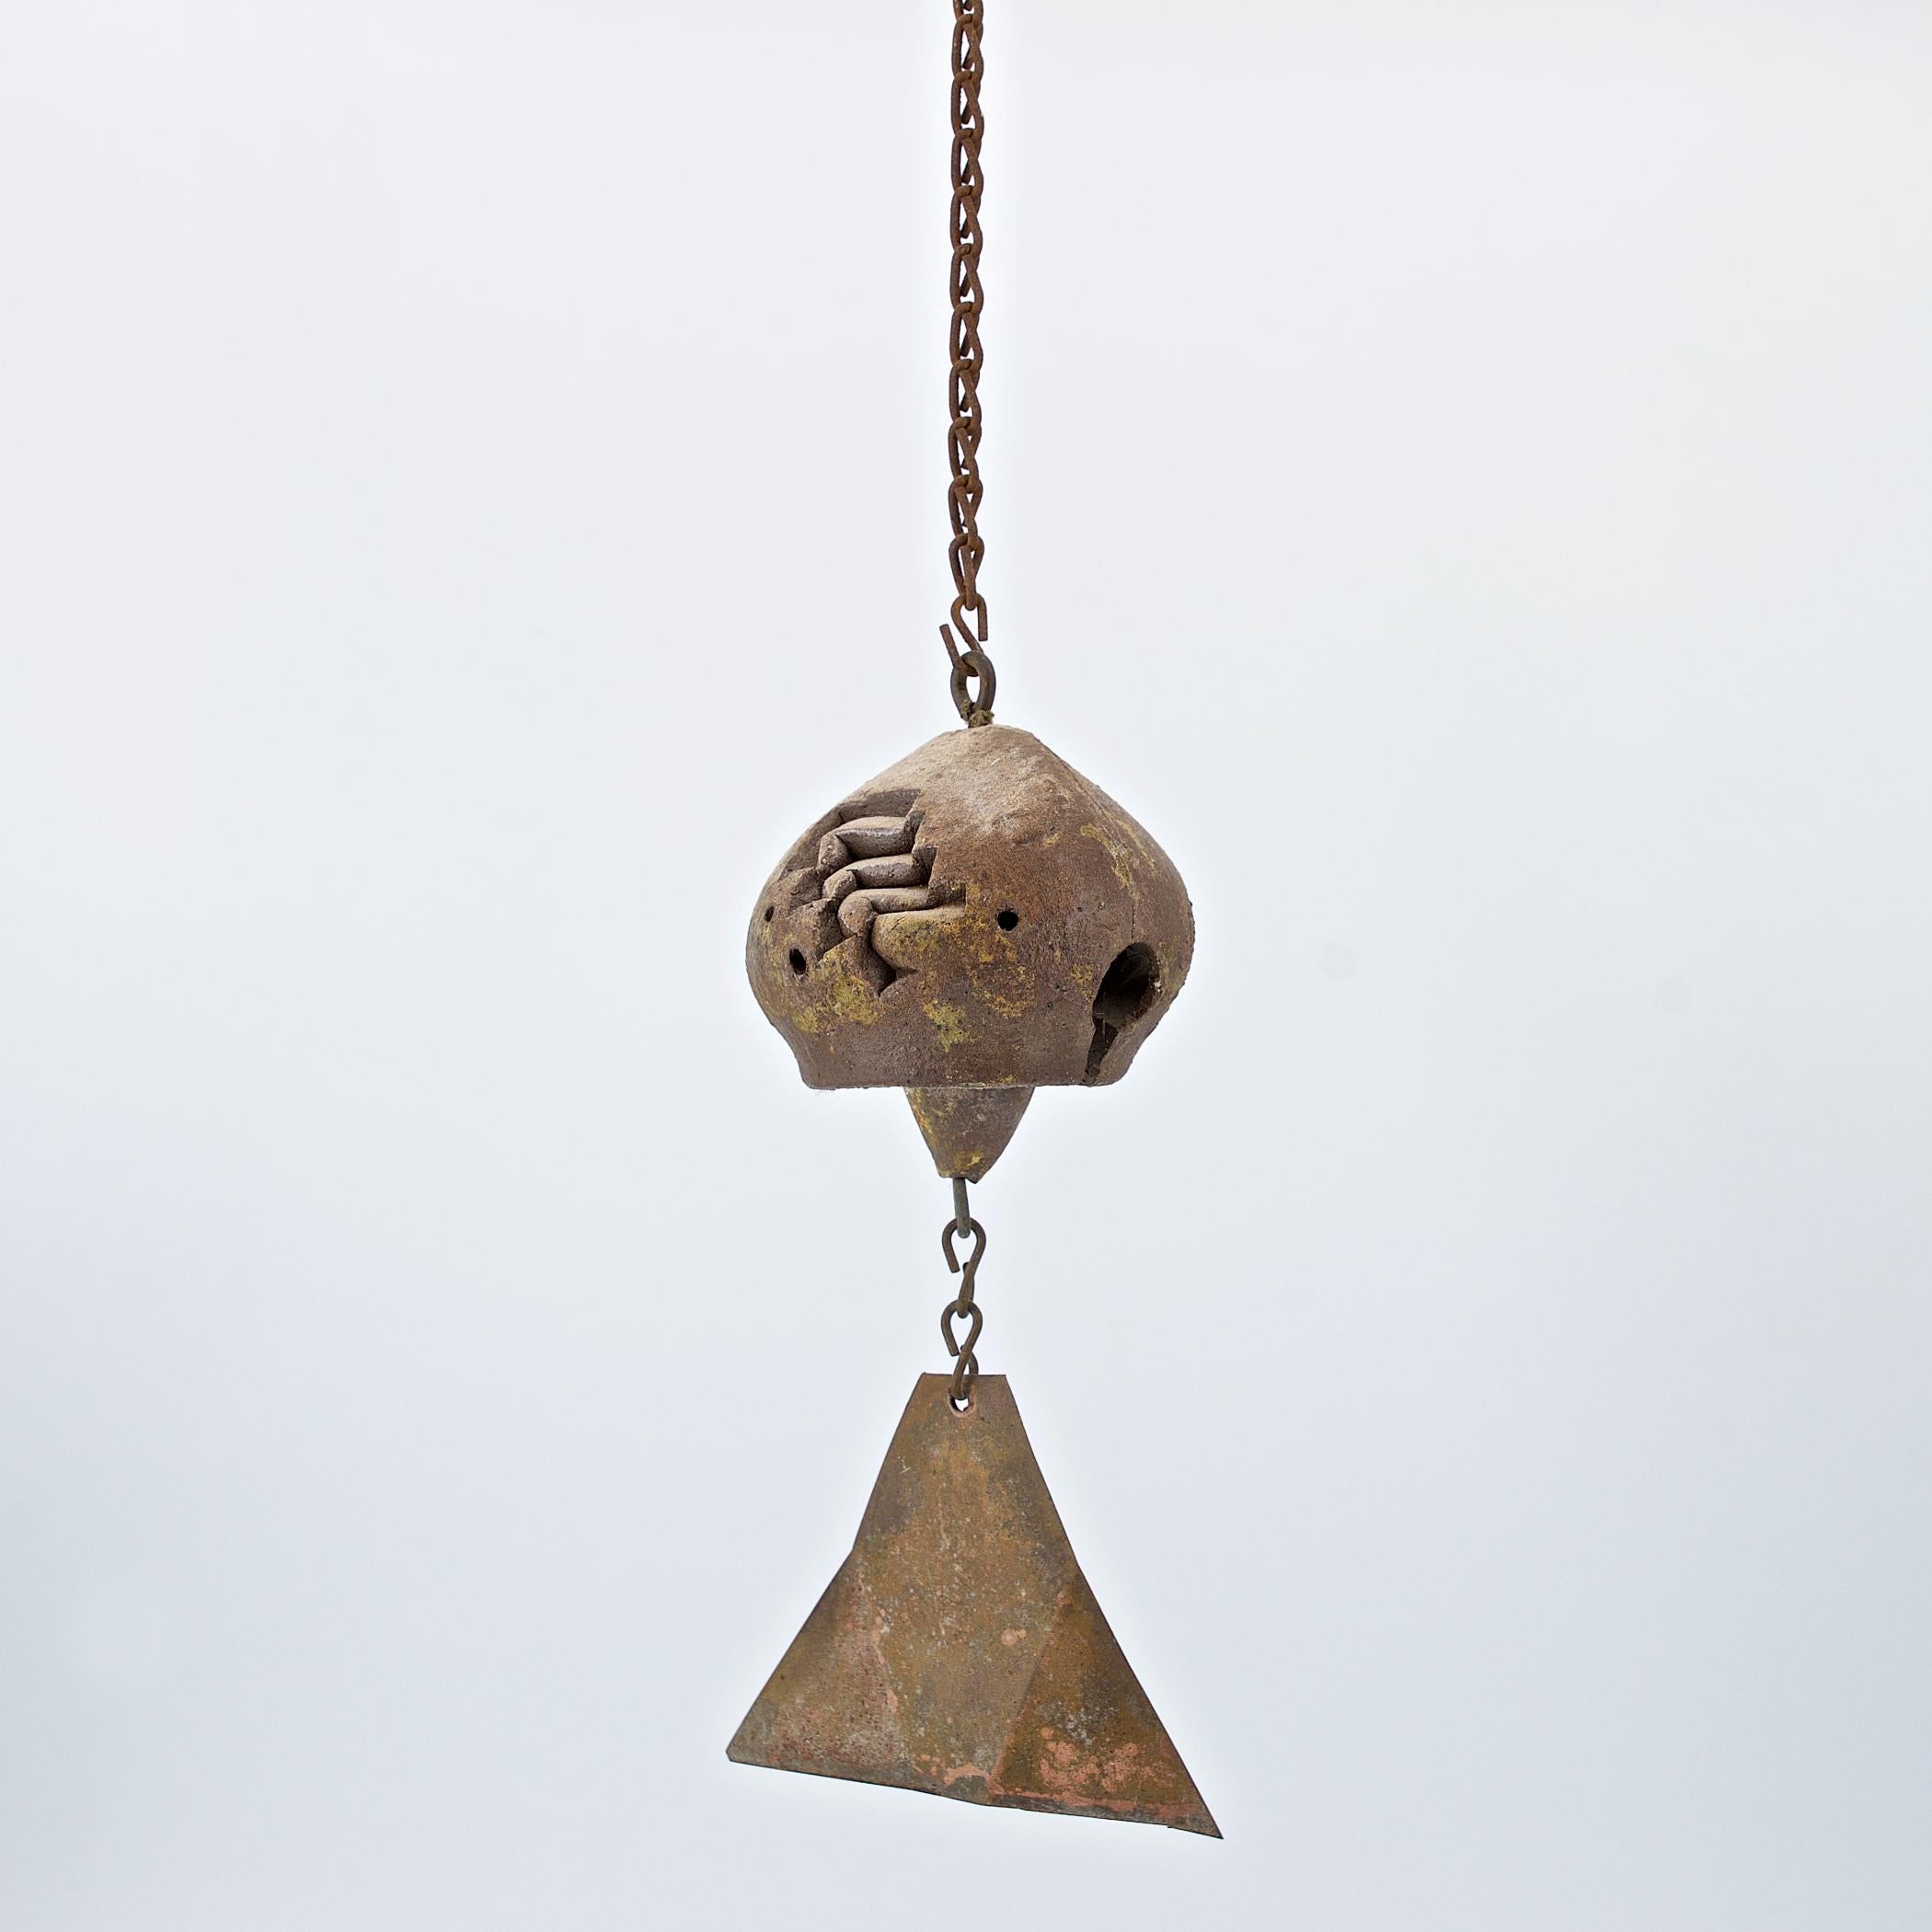 Clay chime with incised abstract designs, with clay clapper and copper fin. Designed by Paolo Soleri and hand-crafted at Arcosanti, c.1960. No discernible cracks, hairlines, or chips. With the Arcosanti cypher mark. Bell is 3